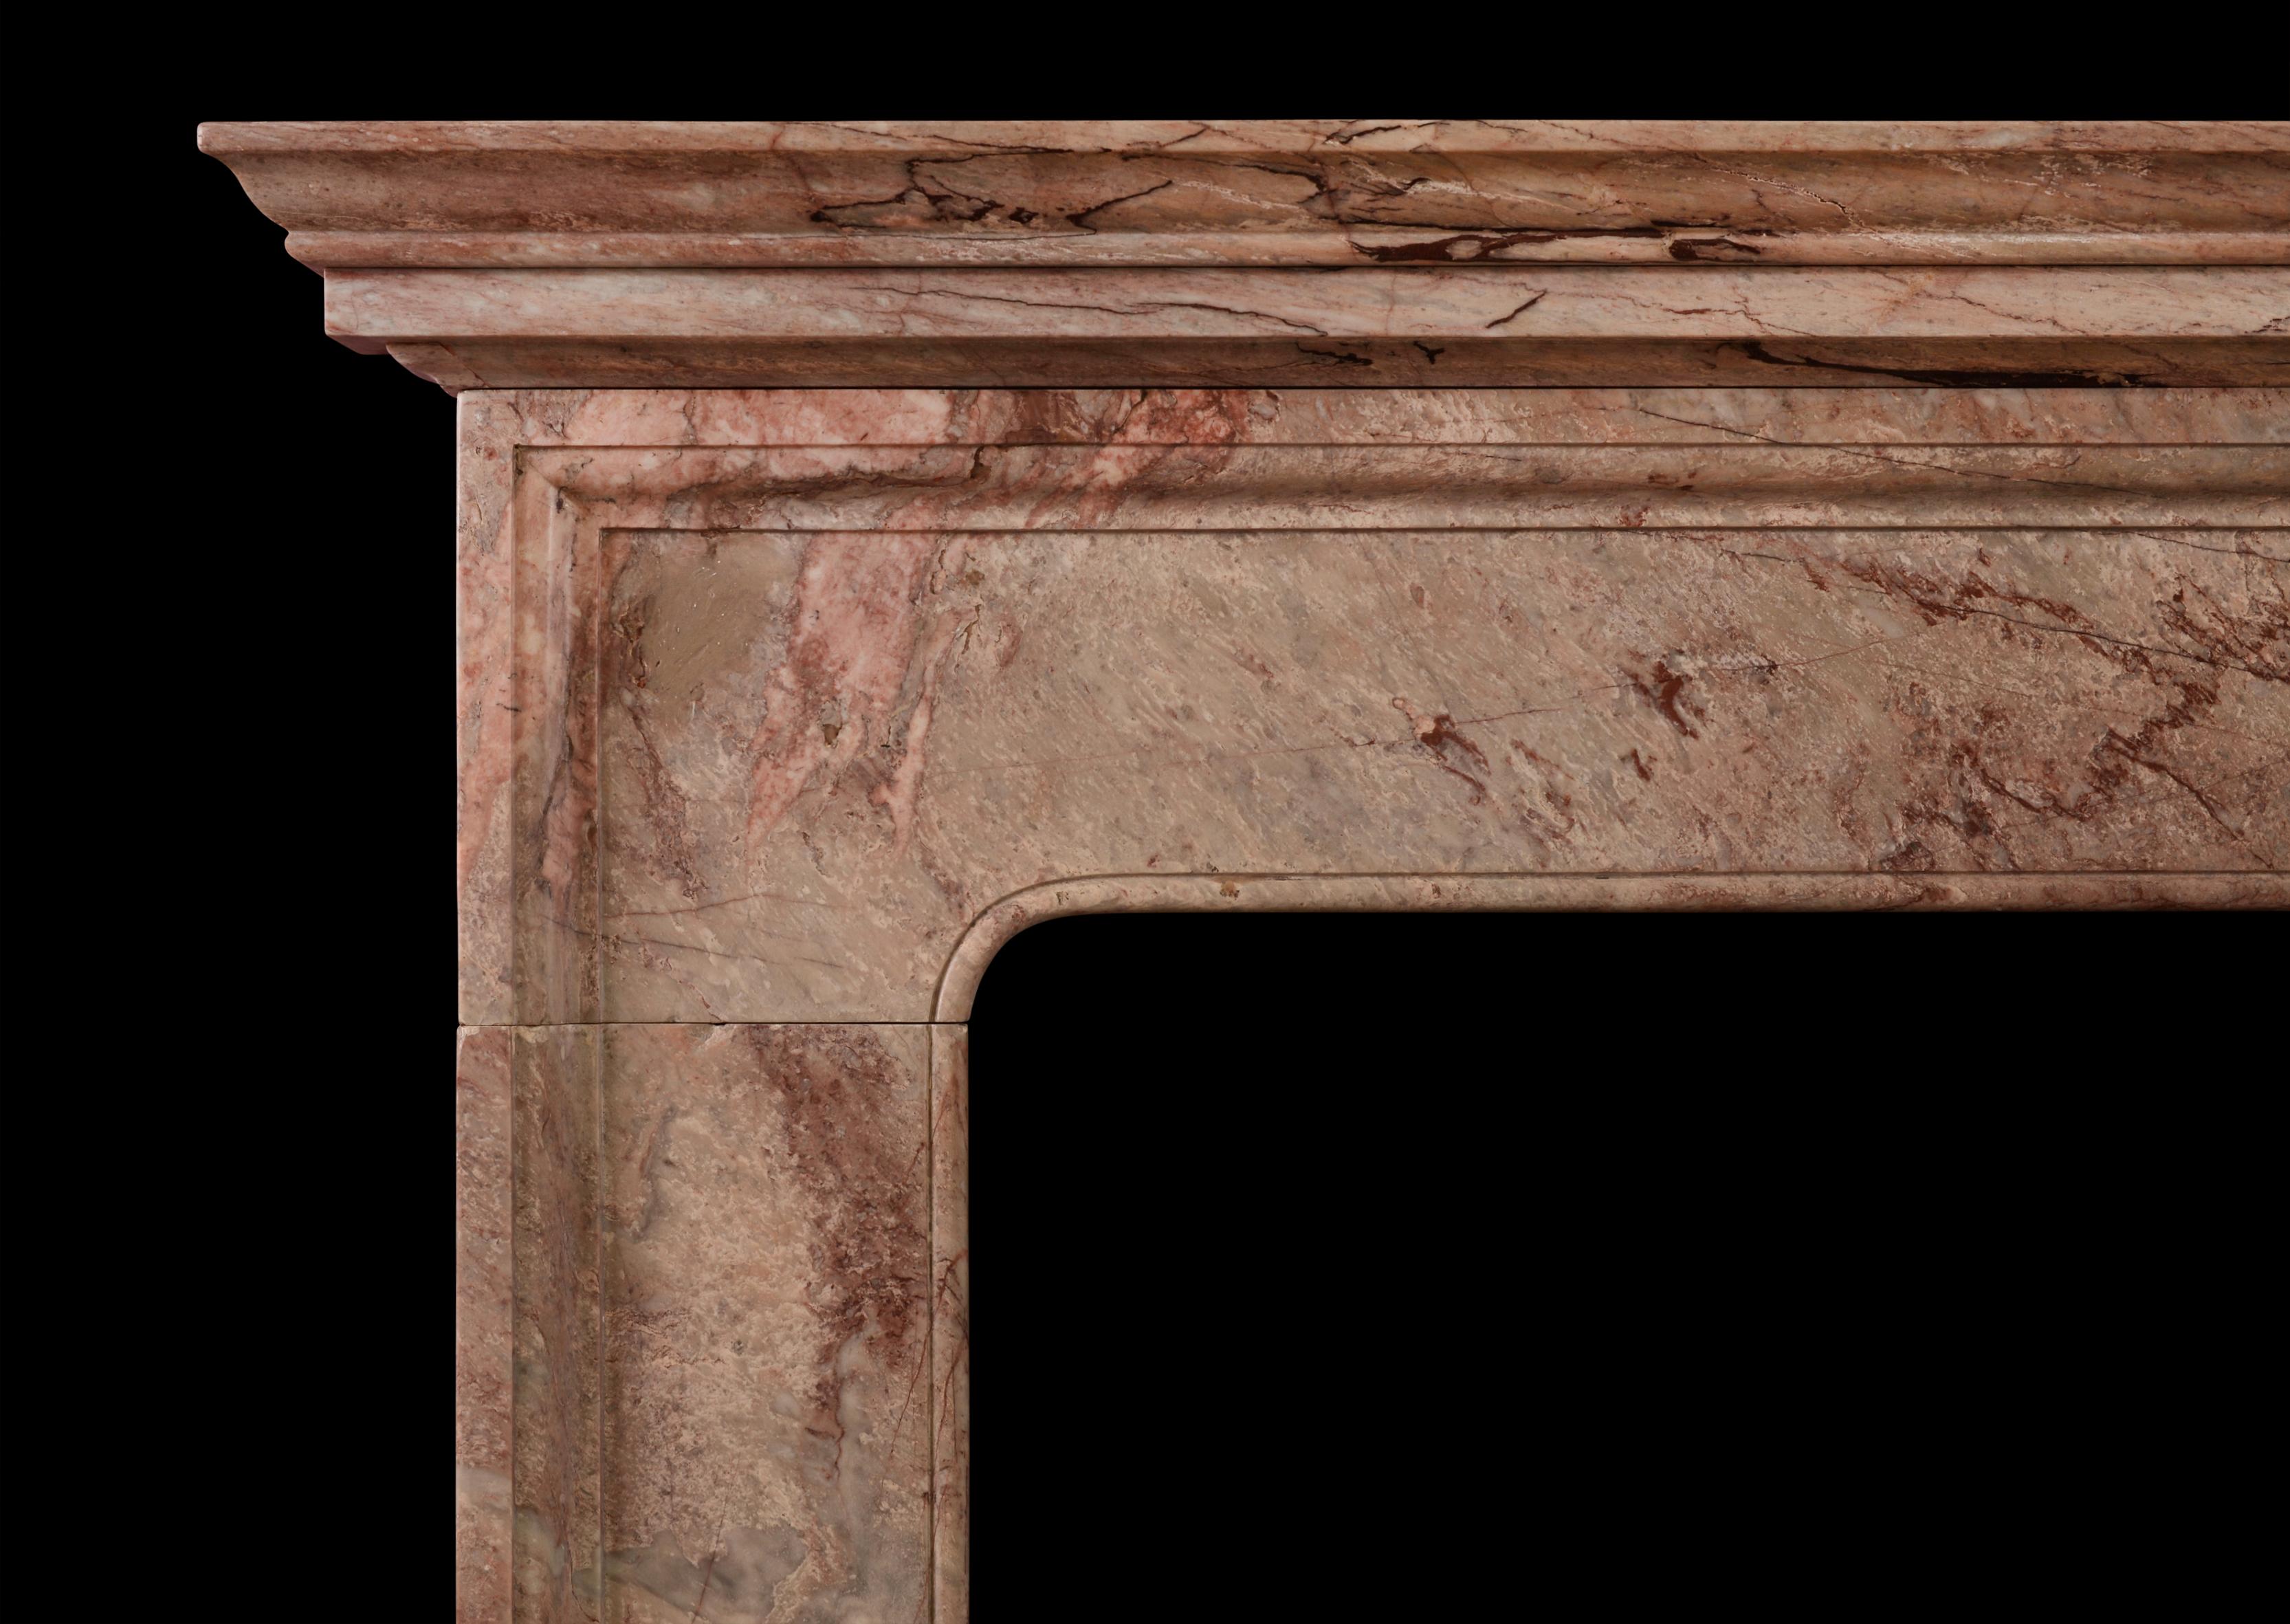 An English moulded fireplace in Rose Vif des Pyreneese marble. The plain frieze and legs with moulded shelf above. The particularly narrow depth of this fireplace would make it well suited to a room where space is limited. 19th century, in the early